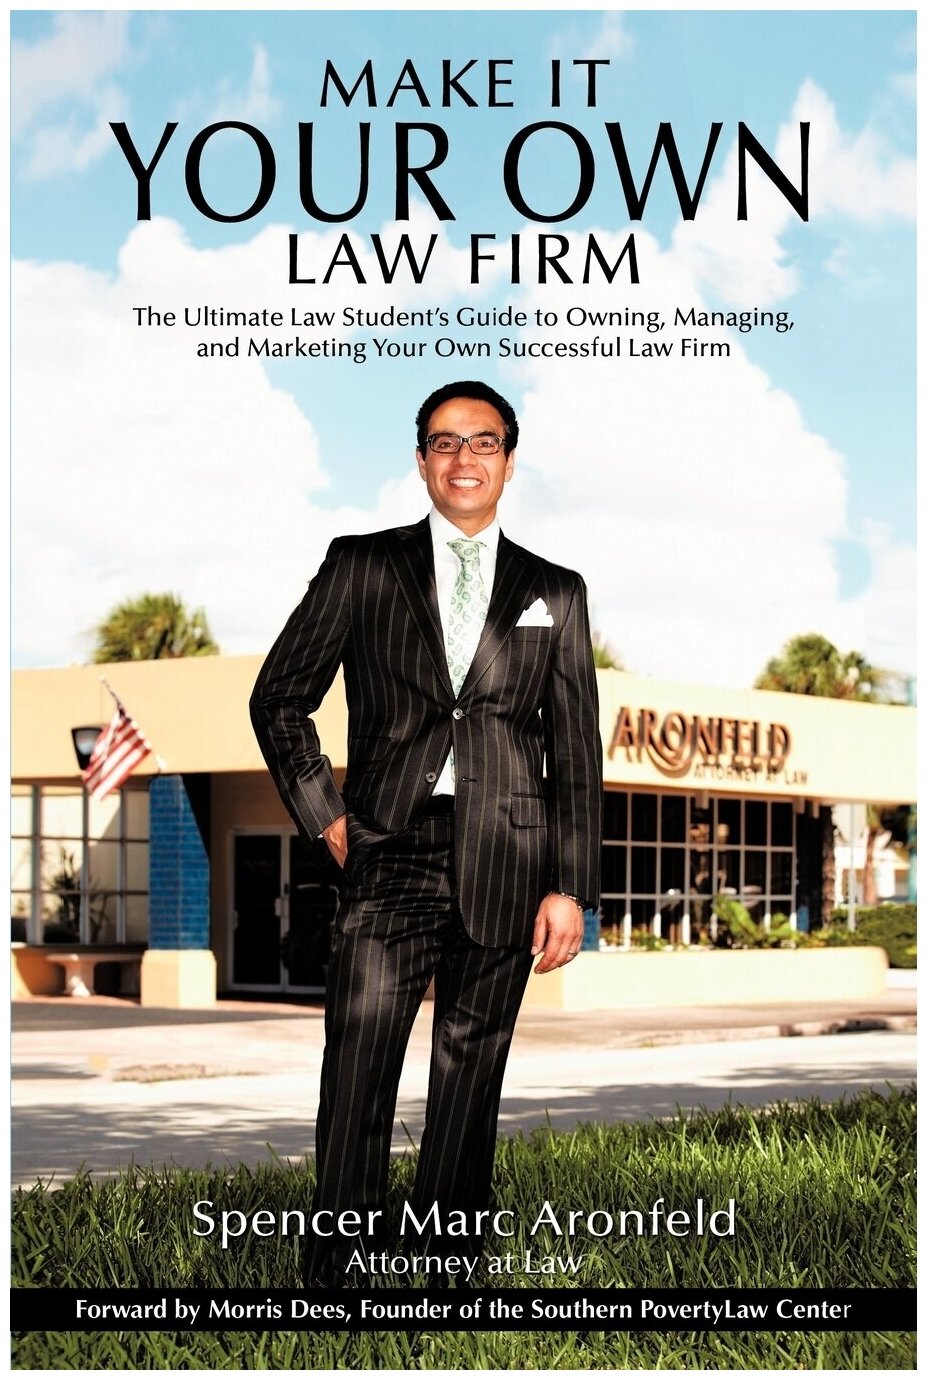 Make It Your Own Law Firm. The Ultimate Law Student's Guide to Owning Managing and Marketing Your Own Successful Law Firm